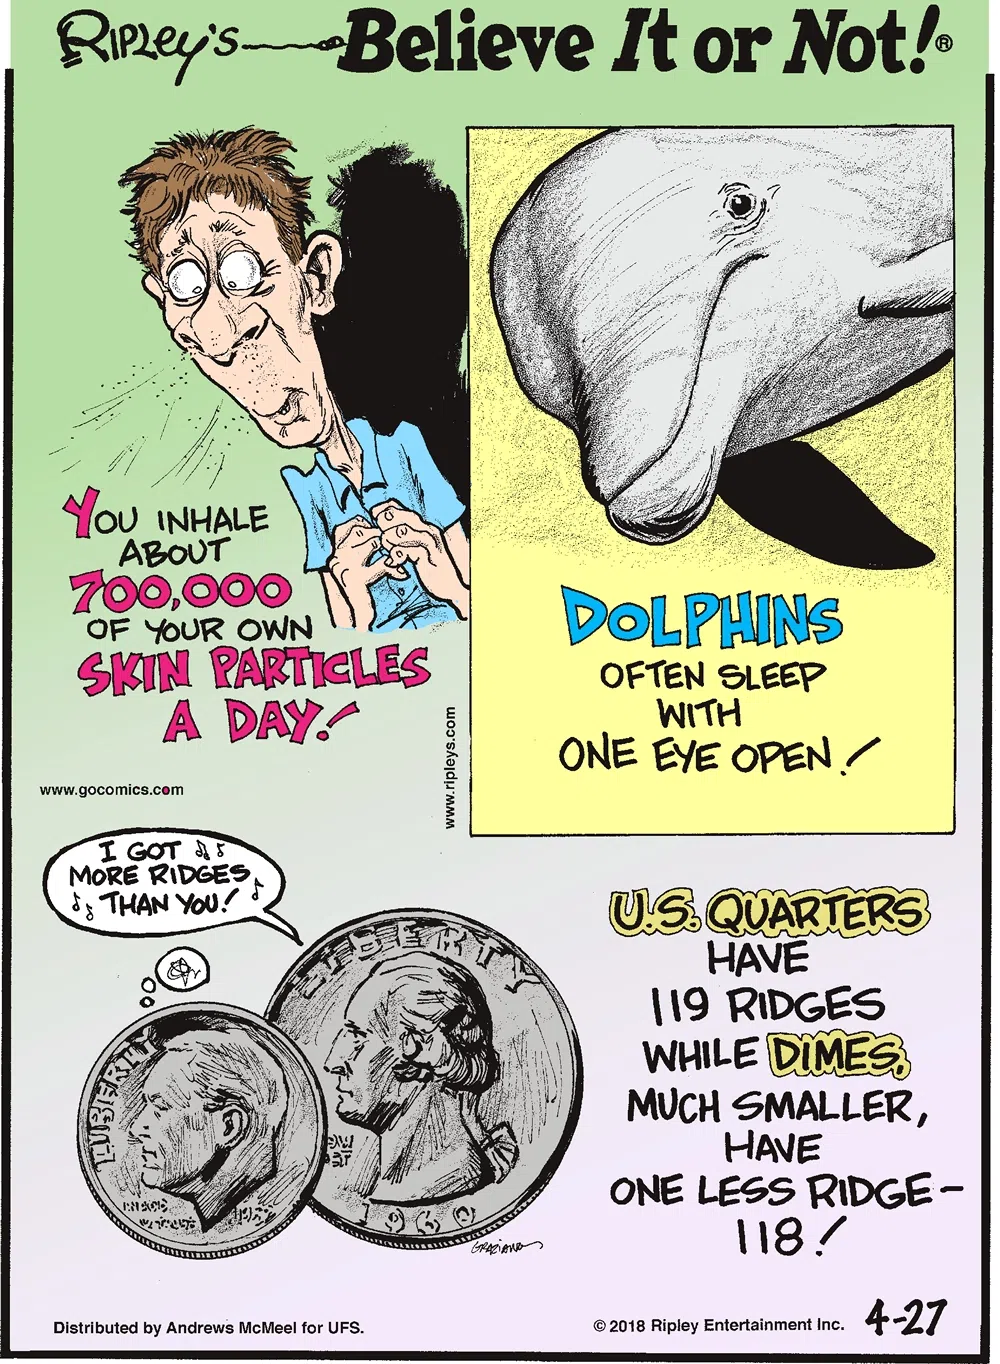 You inhale about 700,000 of your own skin particles a day!-------------------- Dolphins often sleep with one eye open!-------------------- U.S. quarters have 119 ridges while dimes, much smaller, have one less ridge - 118!